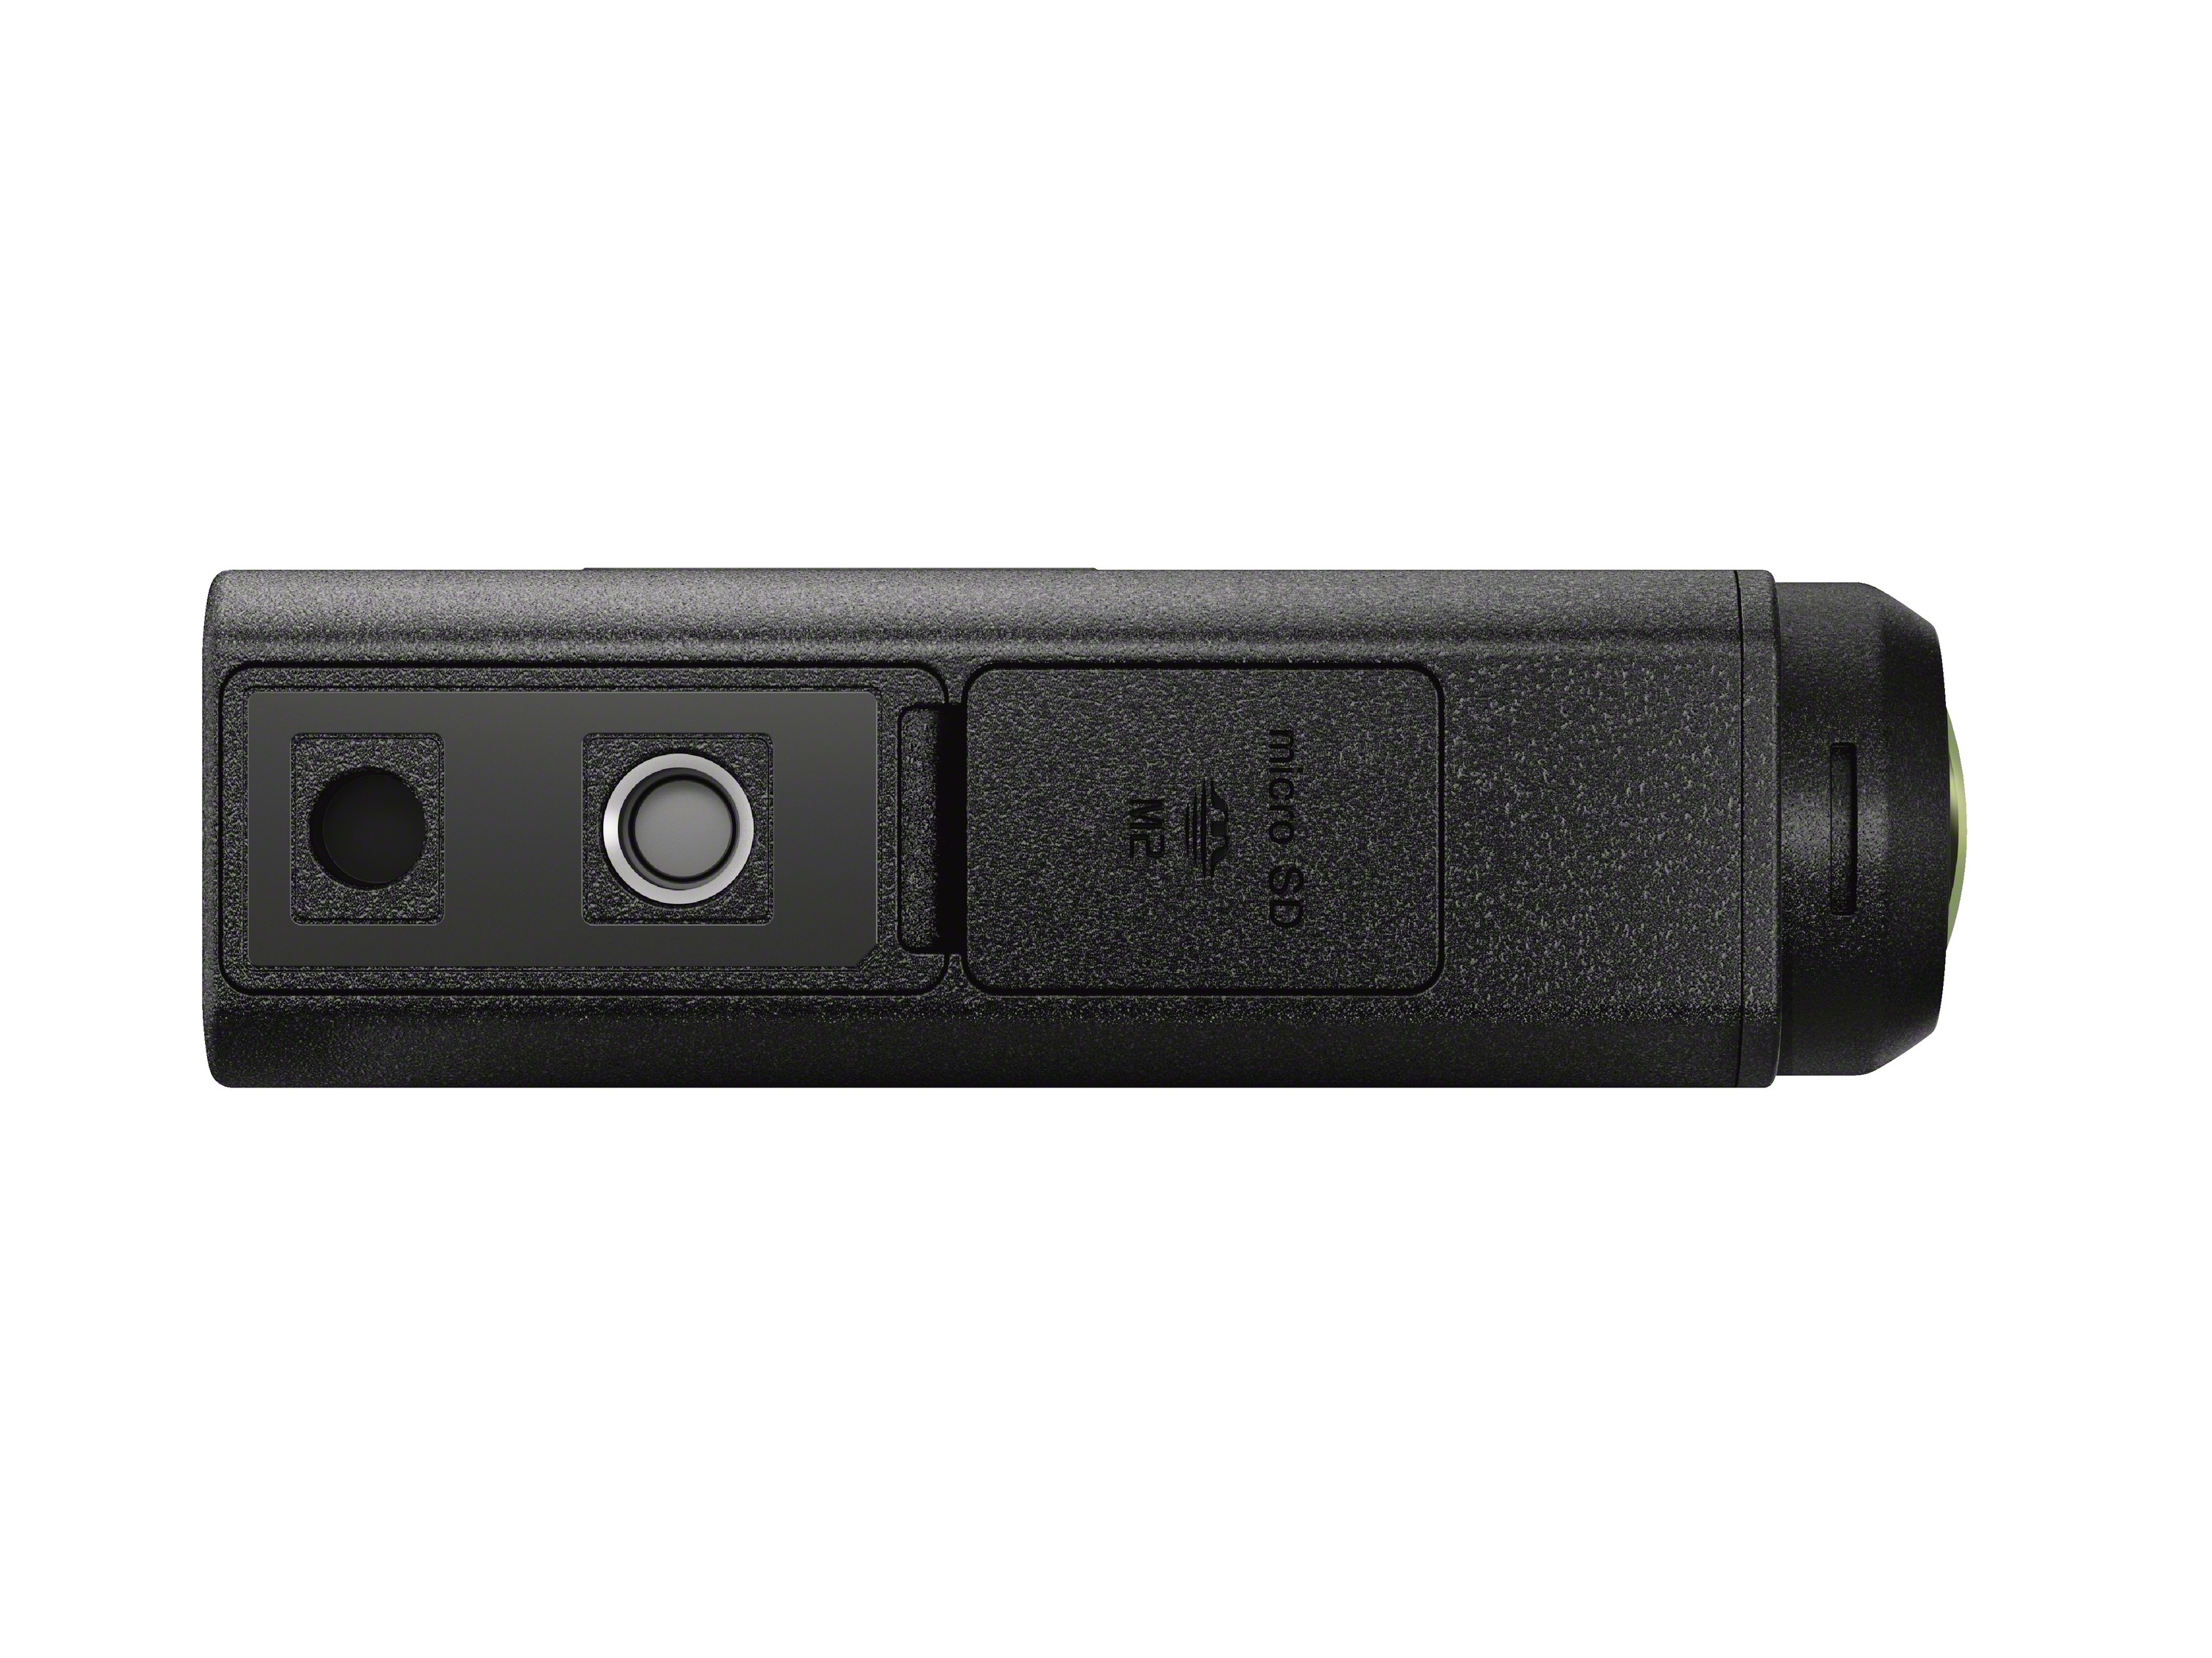 SONY HDR-AS50 Zeiss Action Cam , WLAN